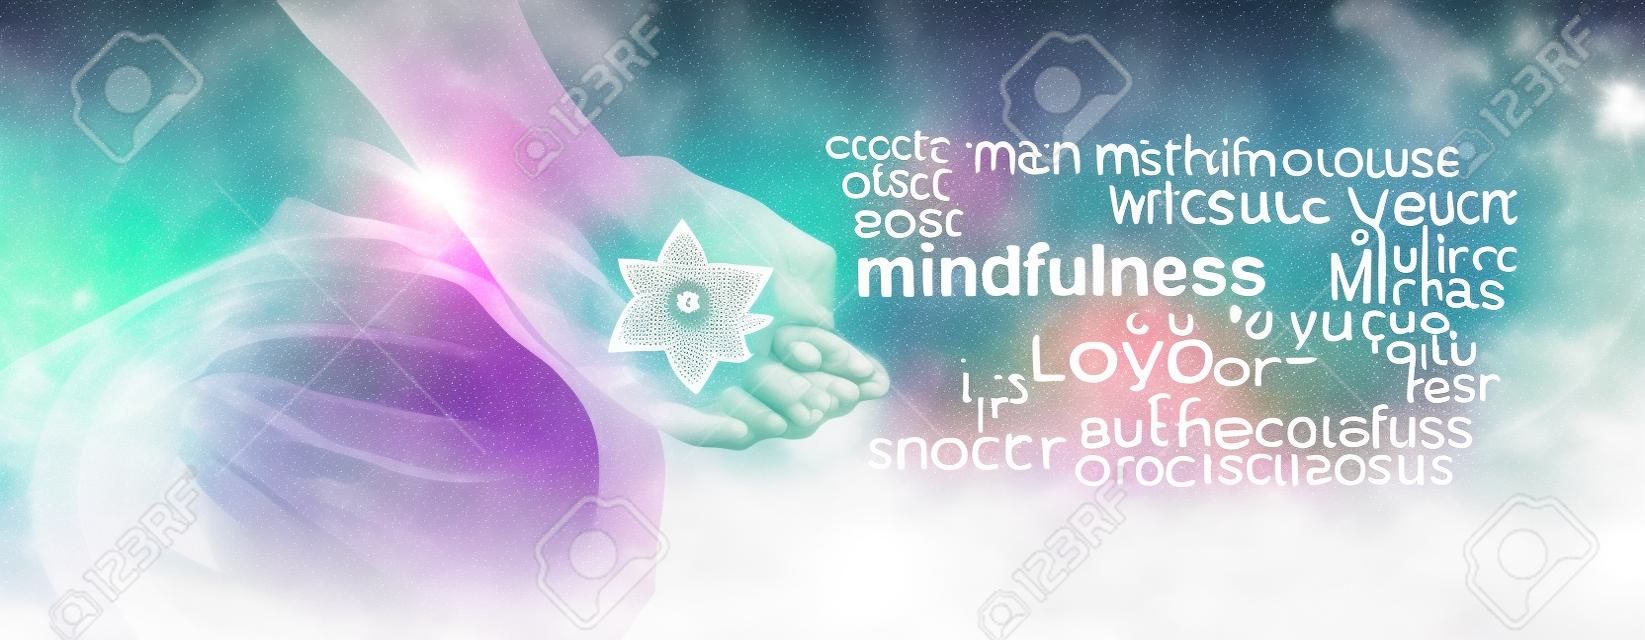 Mindfulness Meditation Word Cloud Banner - Female sitting in Lotus Position on left side with sunlight streaming in holding a Merkabah crystal meditating and a mindfulness word cloud on right side